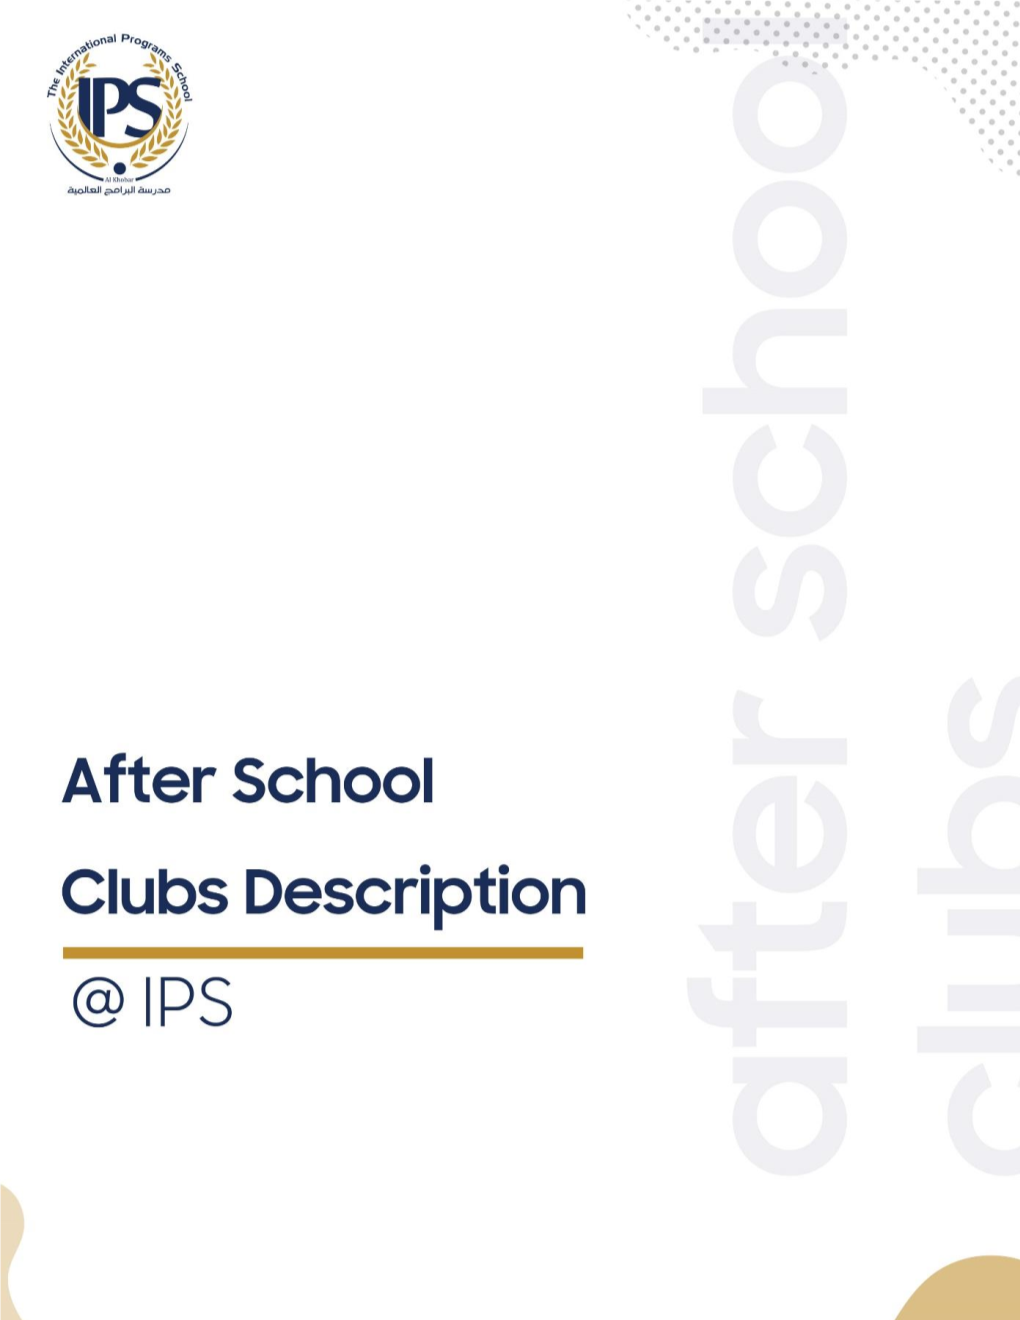 Club Description and Objectives: in Our Sessions We Will Meet on Wednesdays to Develop the Following Objectives